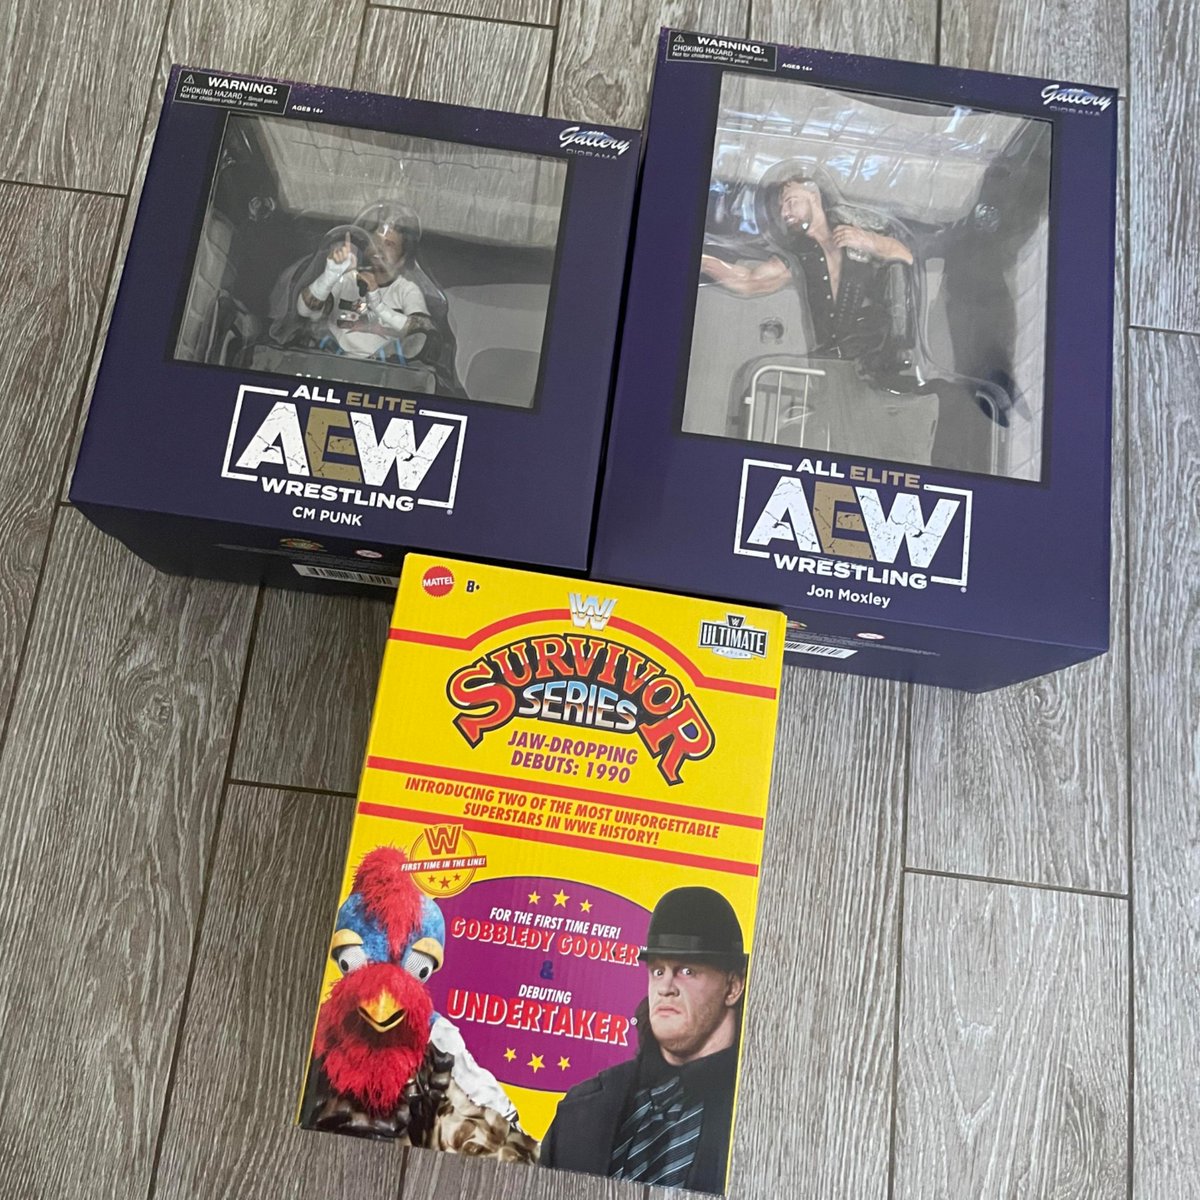 LIVE NOW on @Whatnot! whatnot.com/live/ca945d1c-… GIVING AWAY #AEW CM Punk and Jon Moxley 10-inch PVC sculptures! AUCTIONING OFF Ultimate Edition Gobbledy Gooker & Undertaker 2-Pack, starting at just $1!